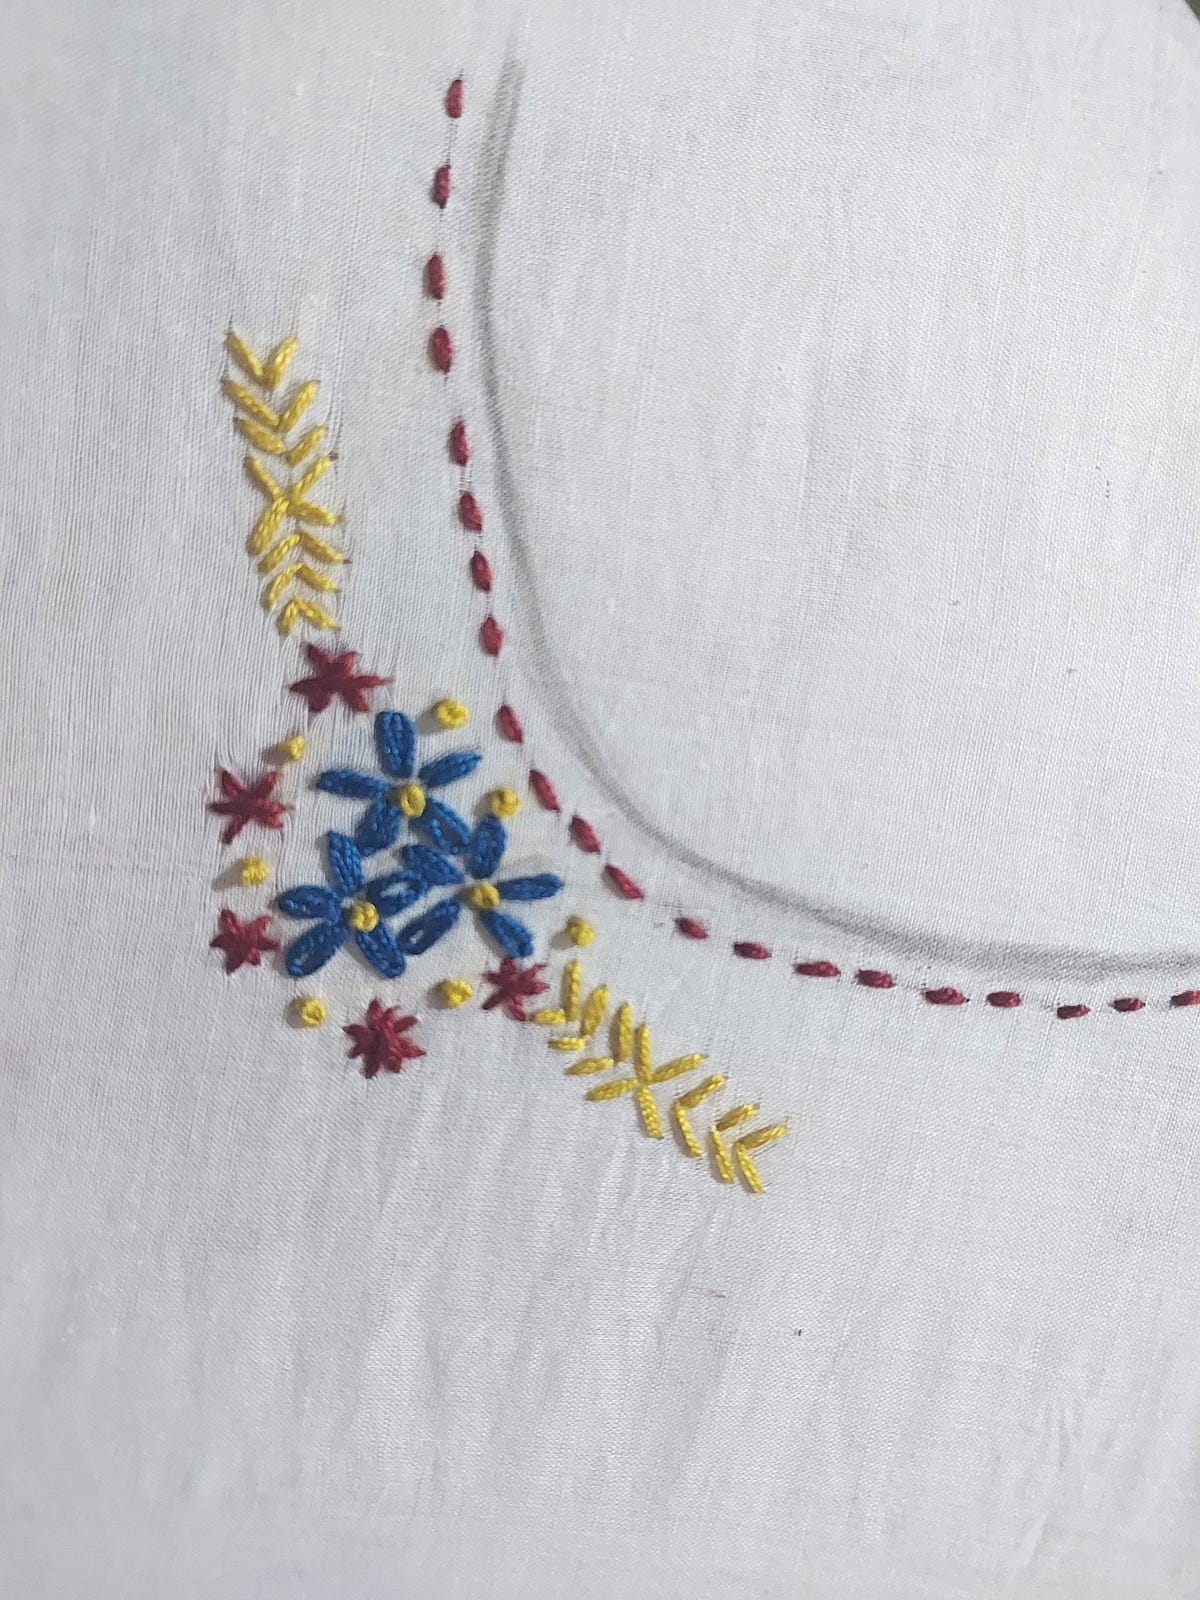 Hand Embroidery Patterns, Simple Neckline Embroidery Tutorial